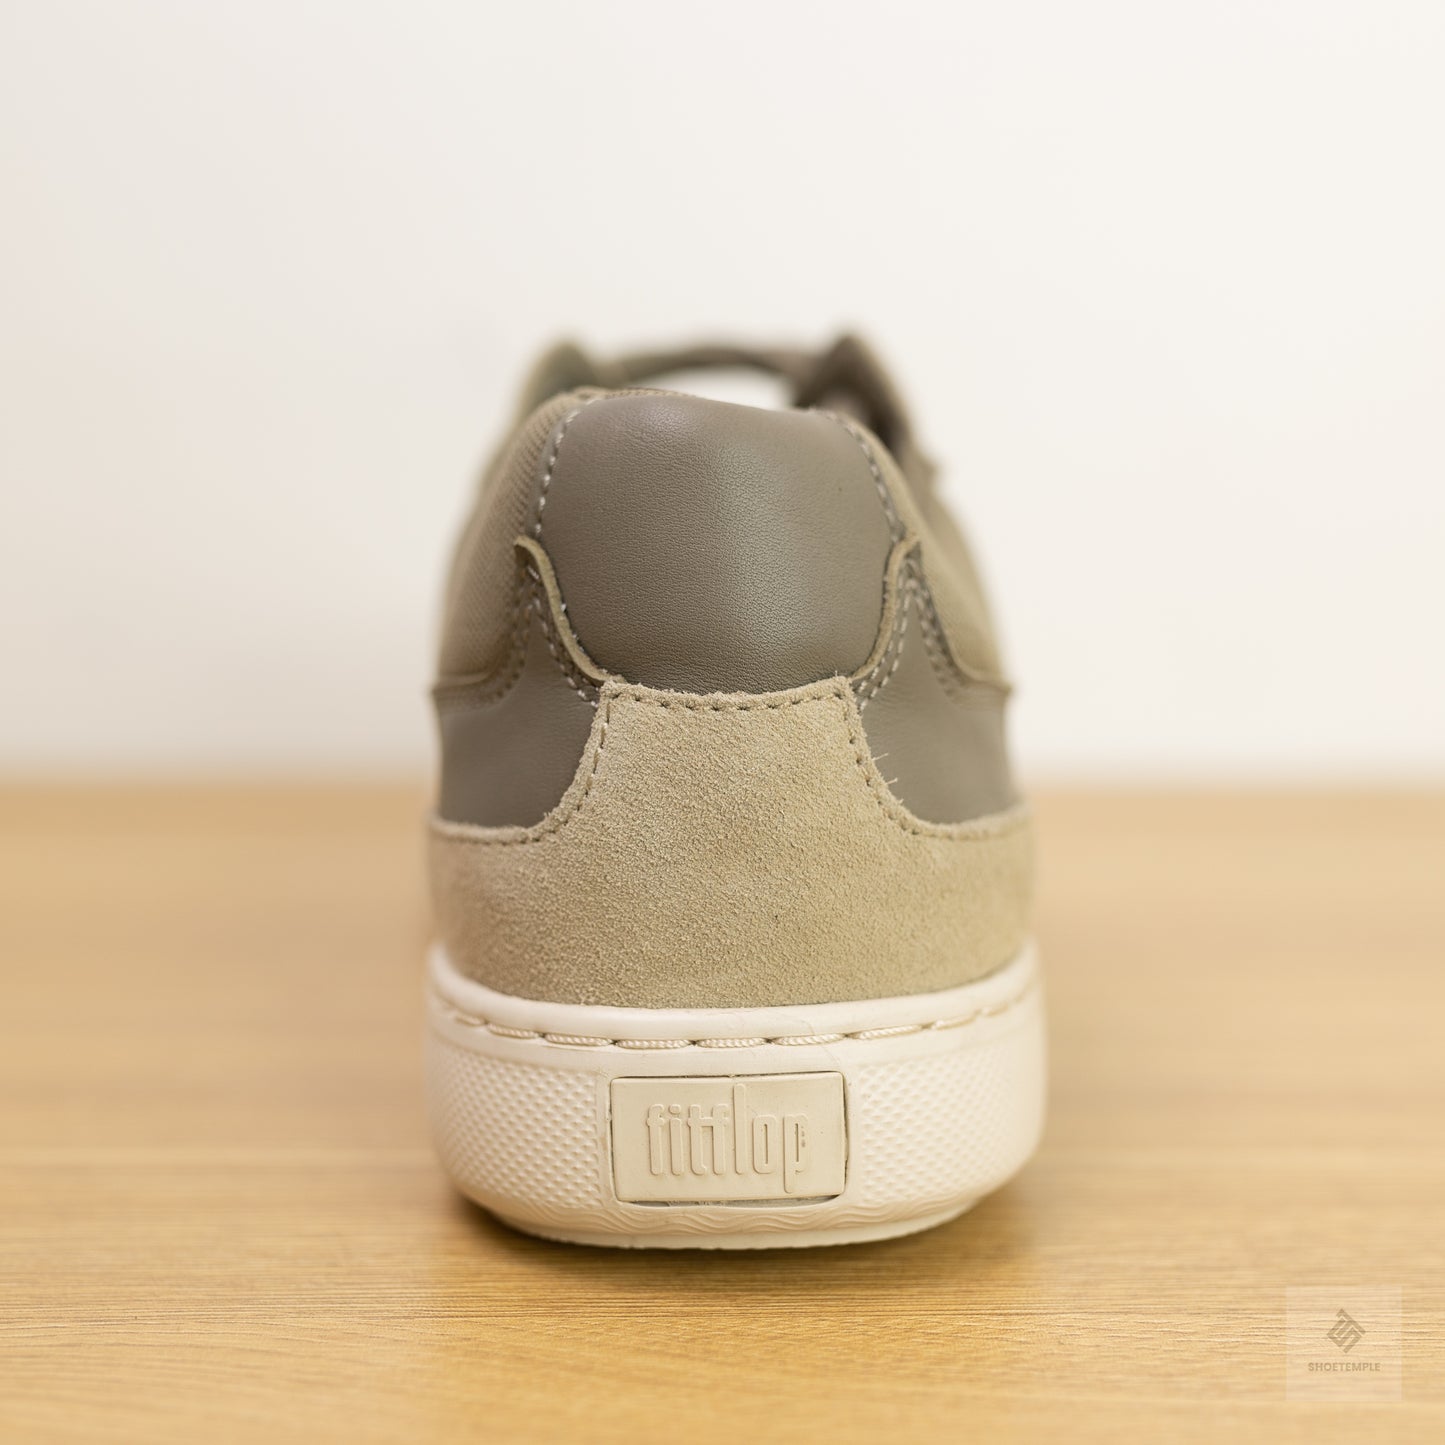 Fitflop Caleb Leather Sneakers